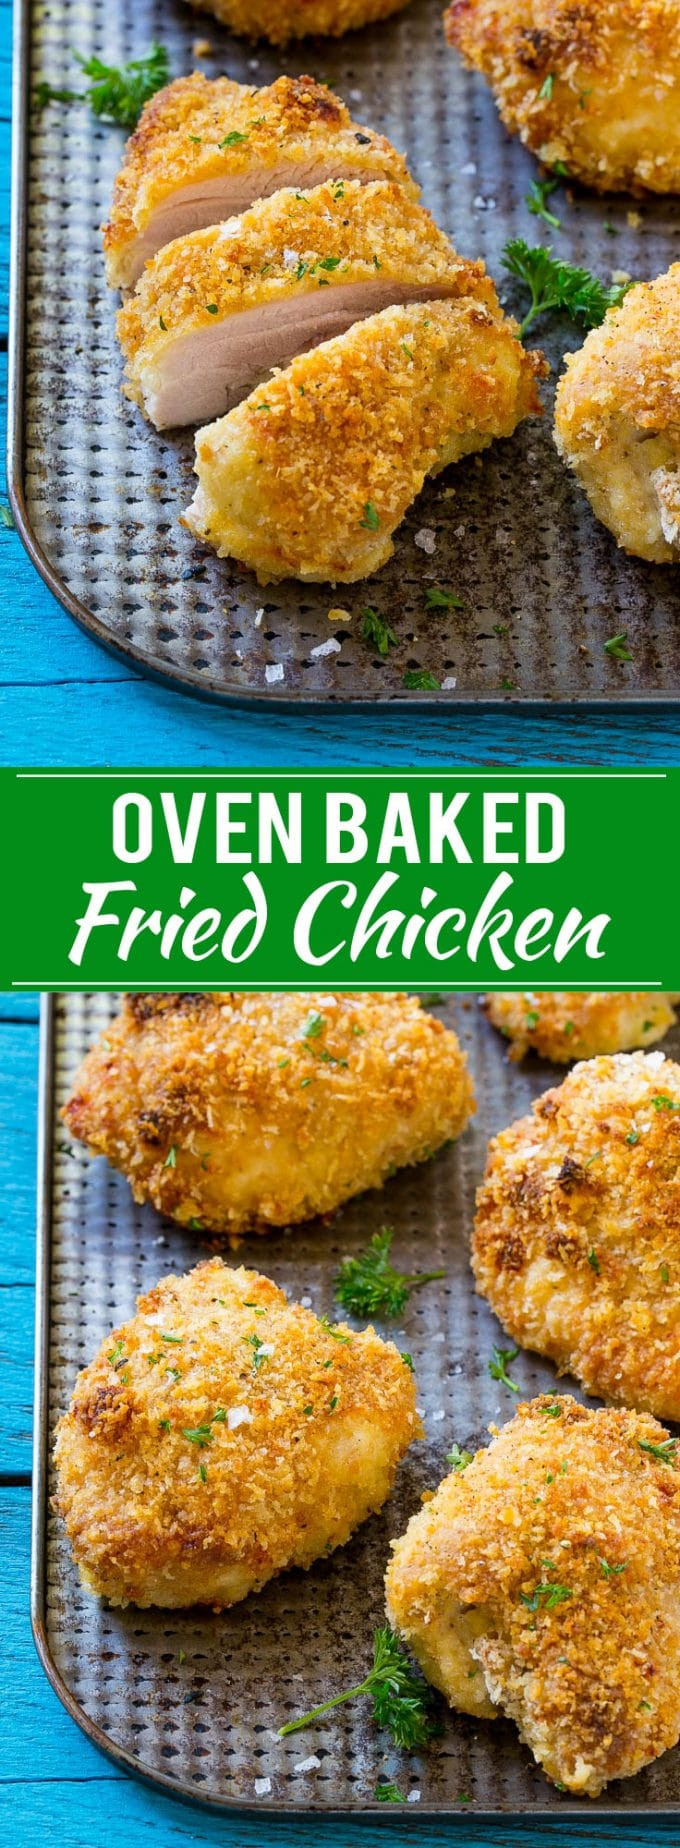 Healthy Oven Fried Chicken
 Baked Fried Chicken Dinner at the Zoo